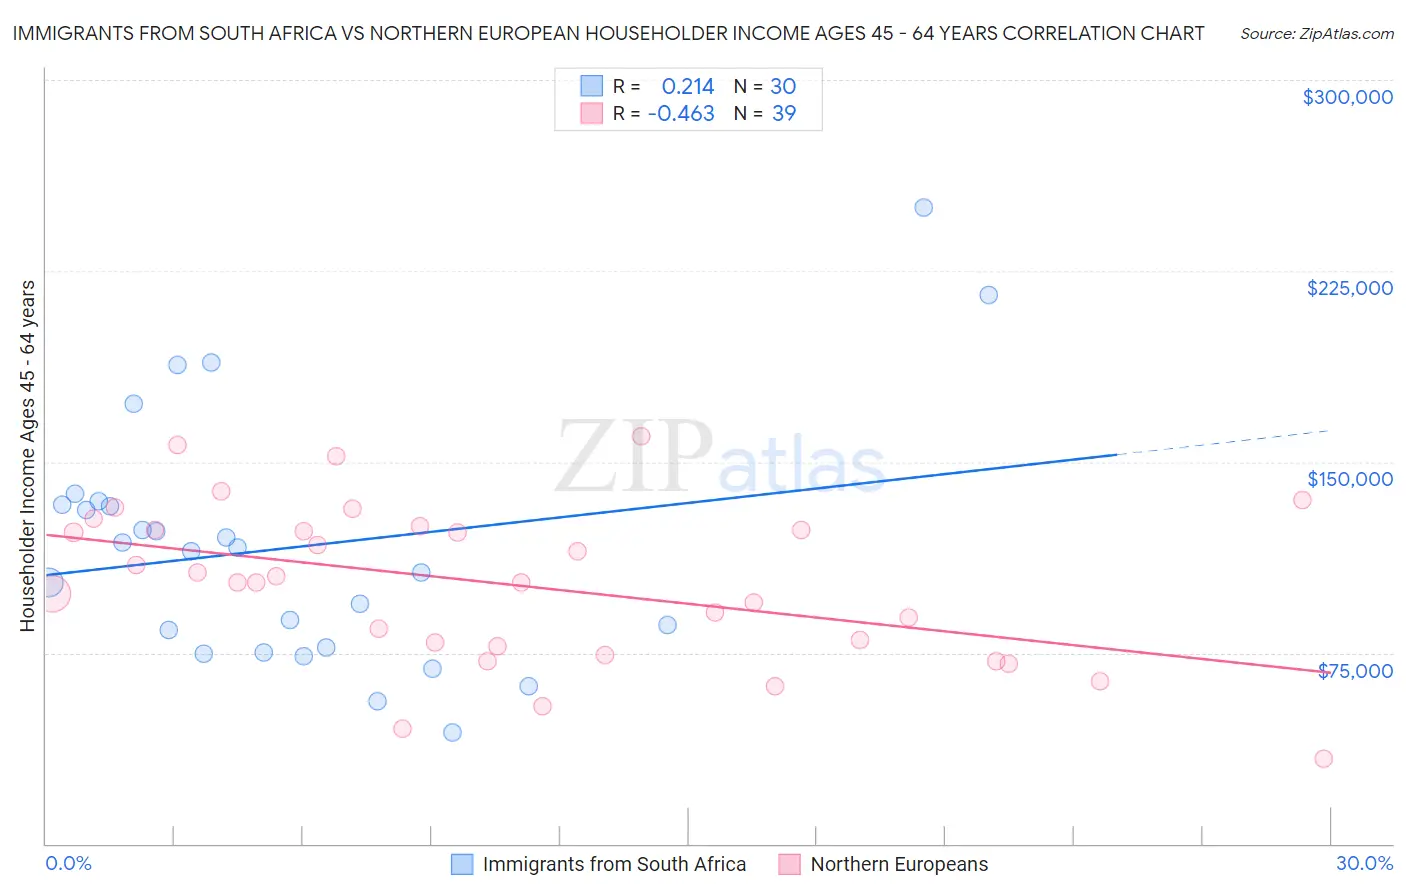 Immigrants from South Africa vs Northern European Householder Income Ages 45 - 64 years